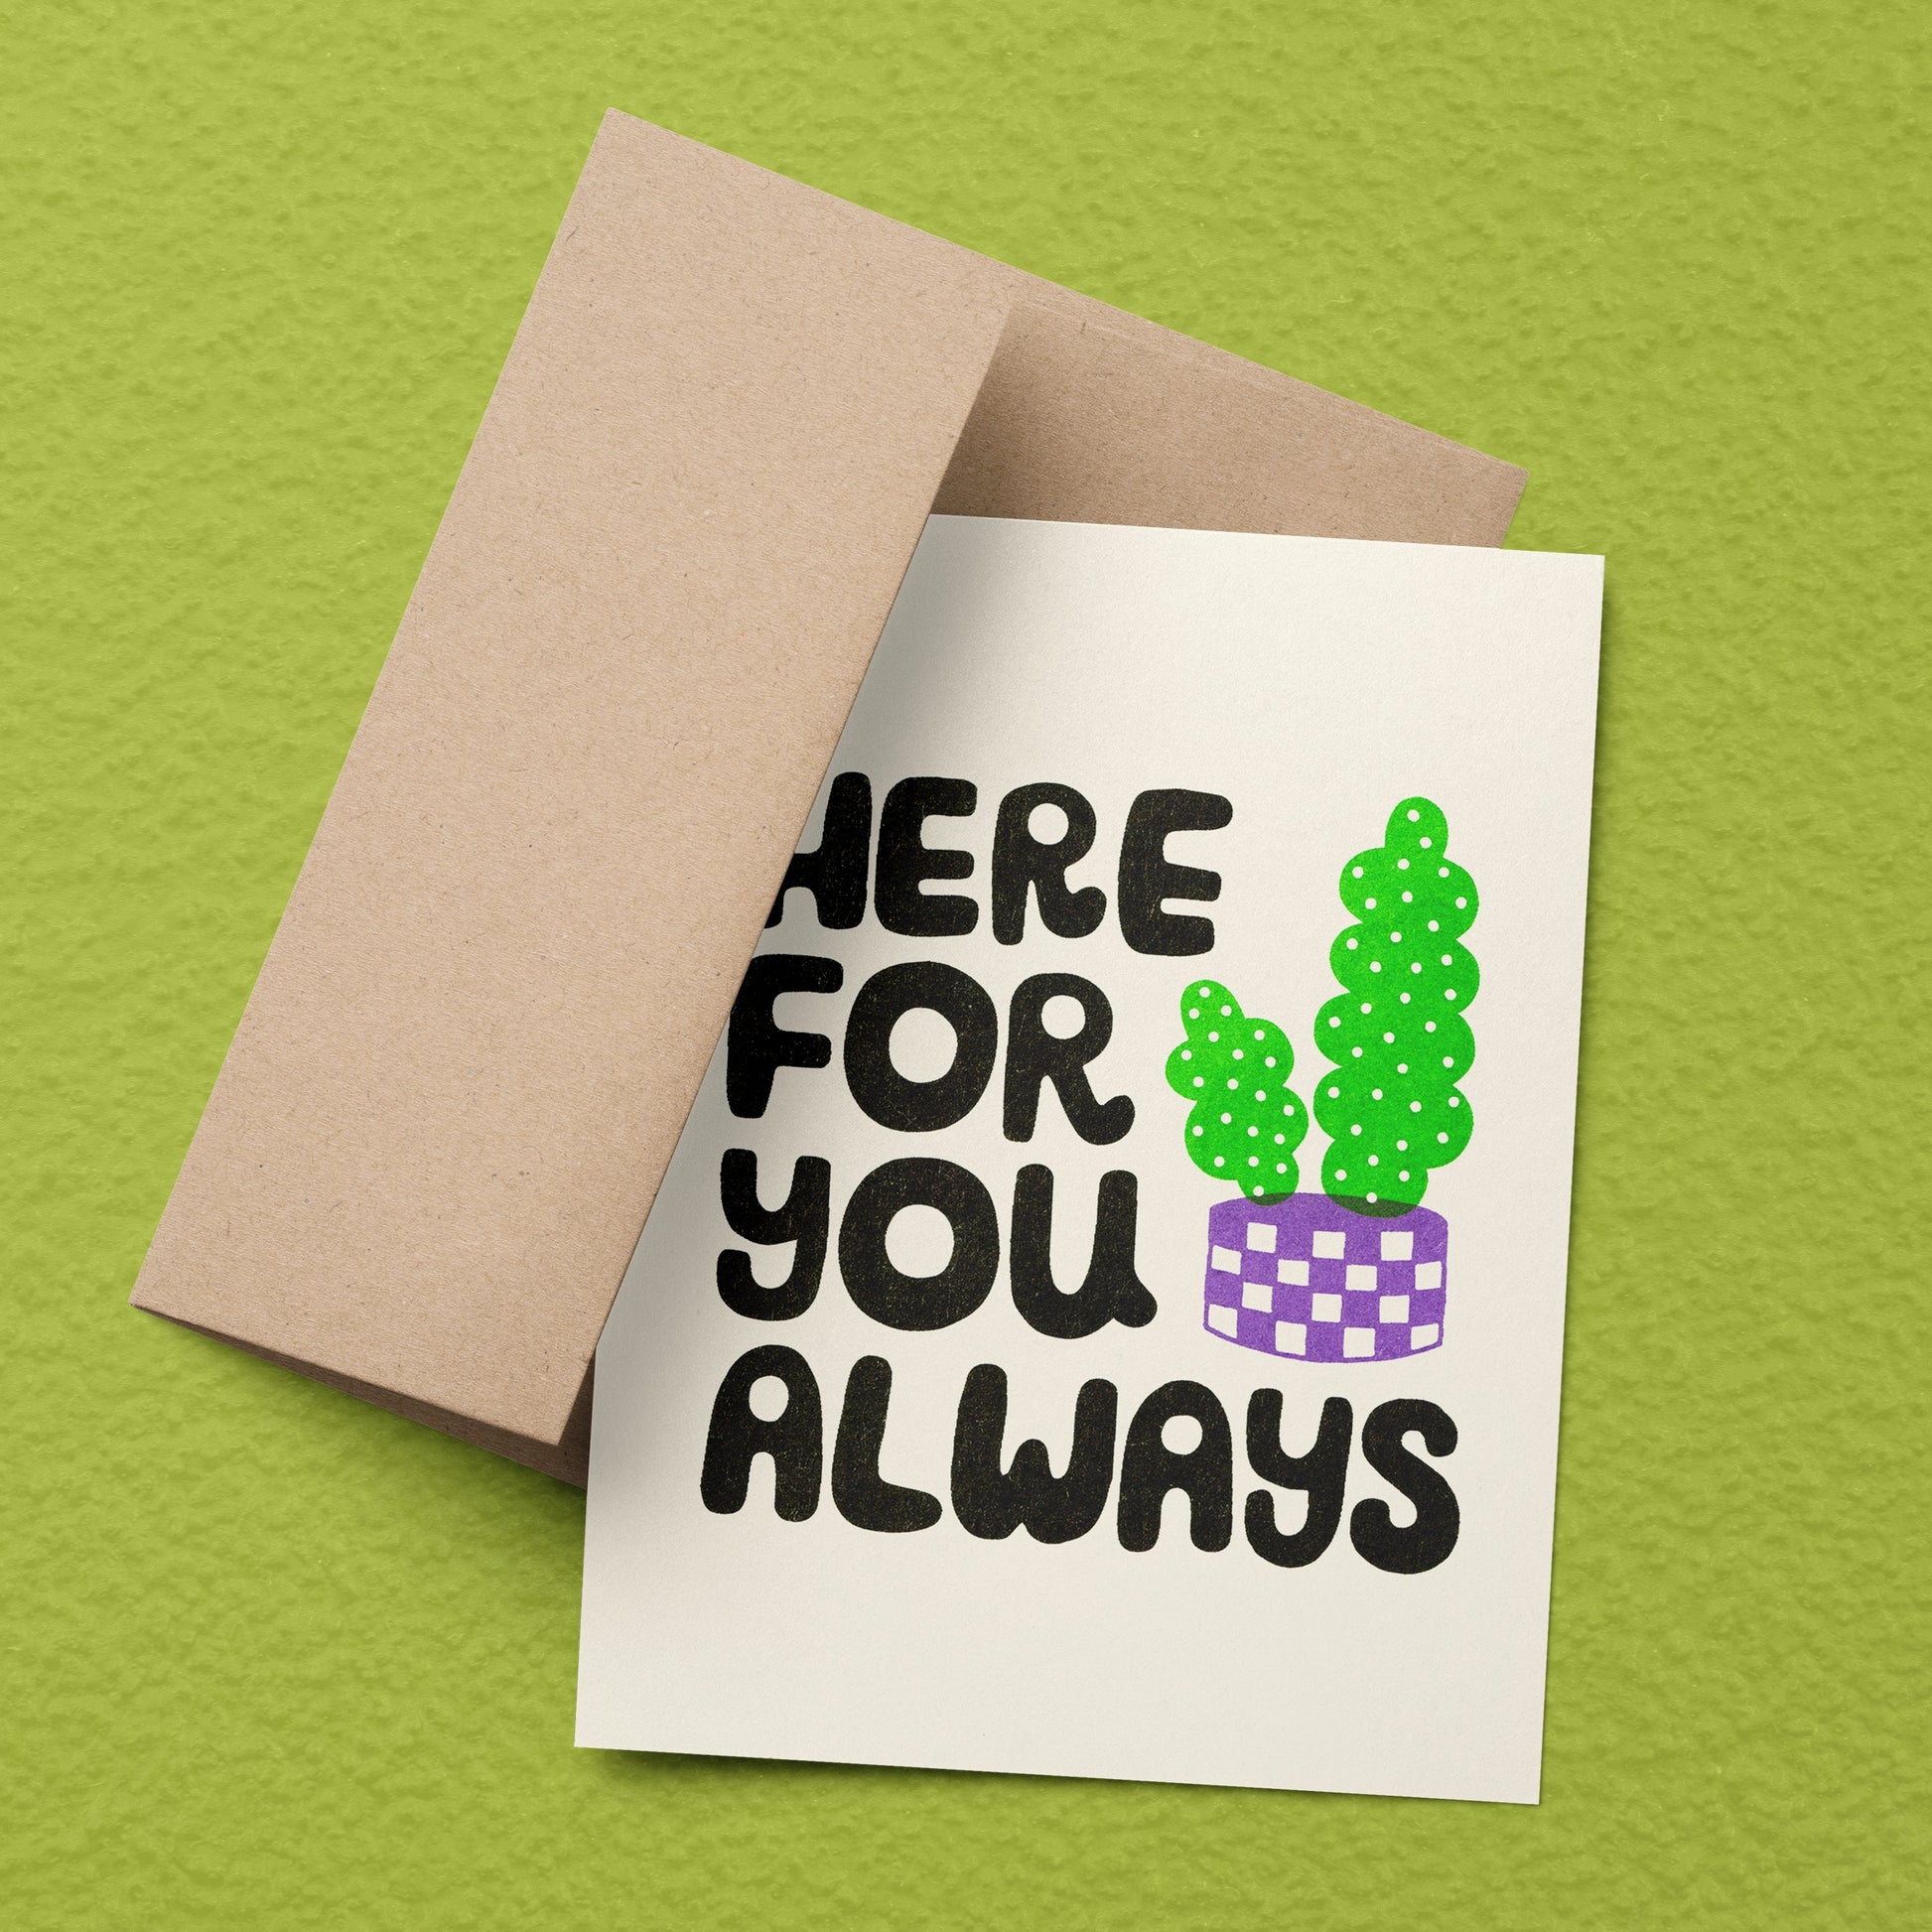 A risograph printed greeting card with kraft envelope, sits on a lime green background.